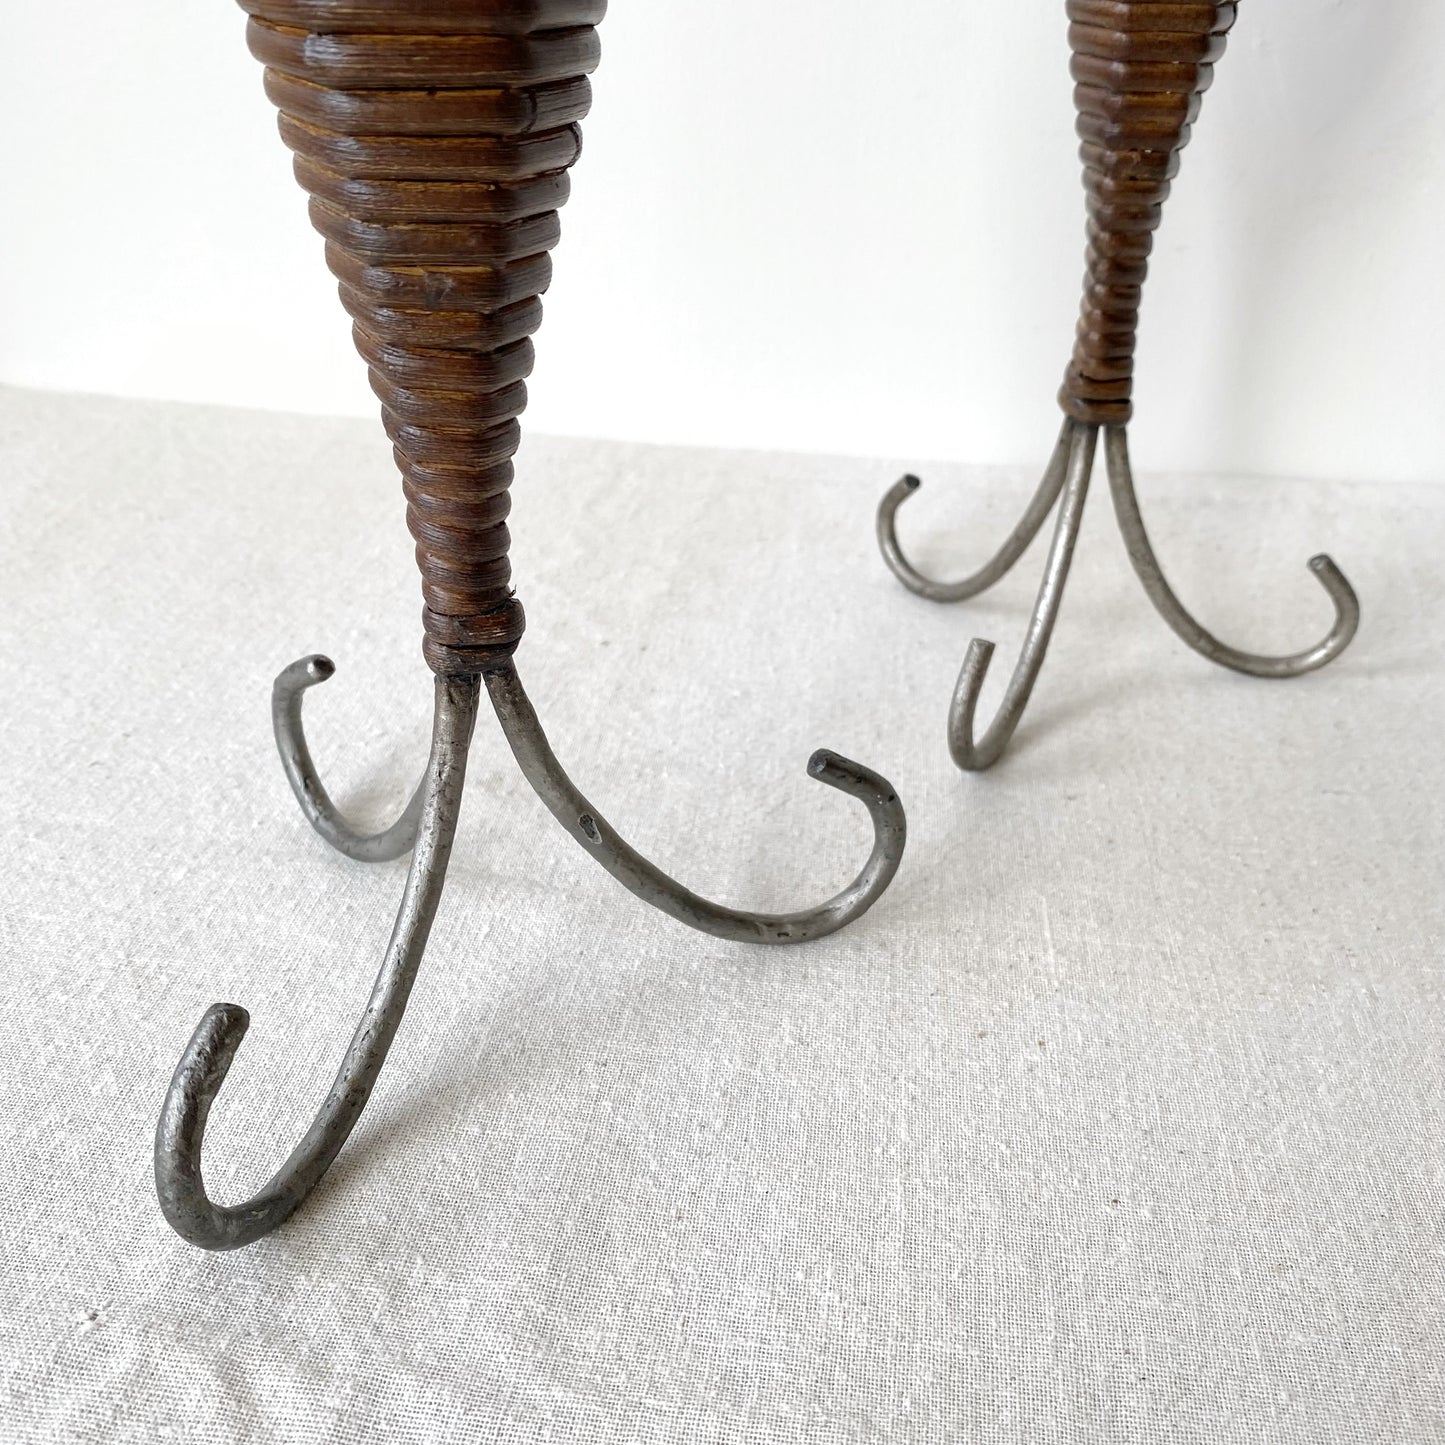 Pair of Vintage Wicker and Metal Candle Holders